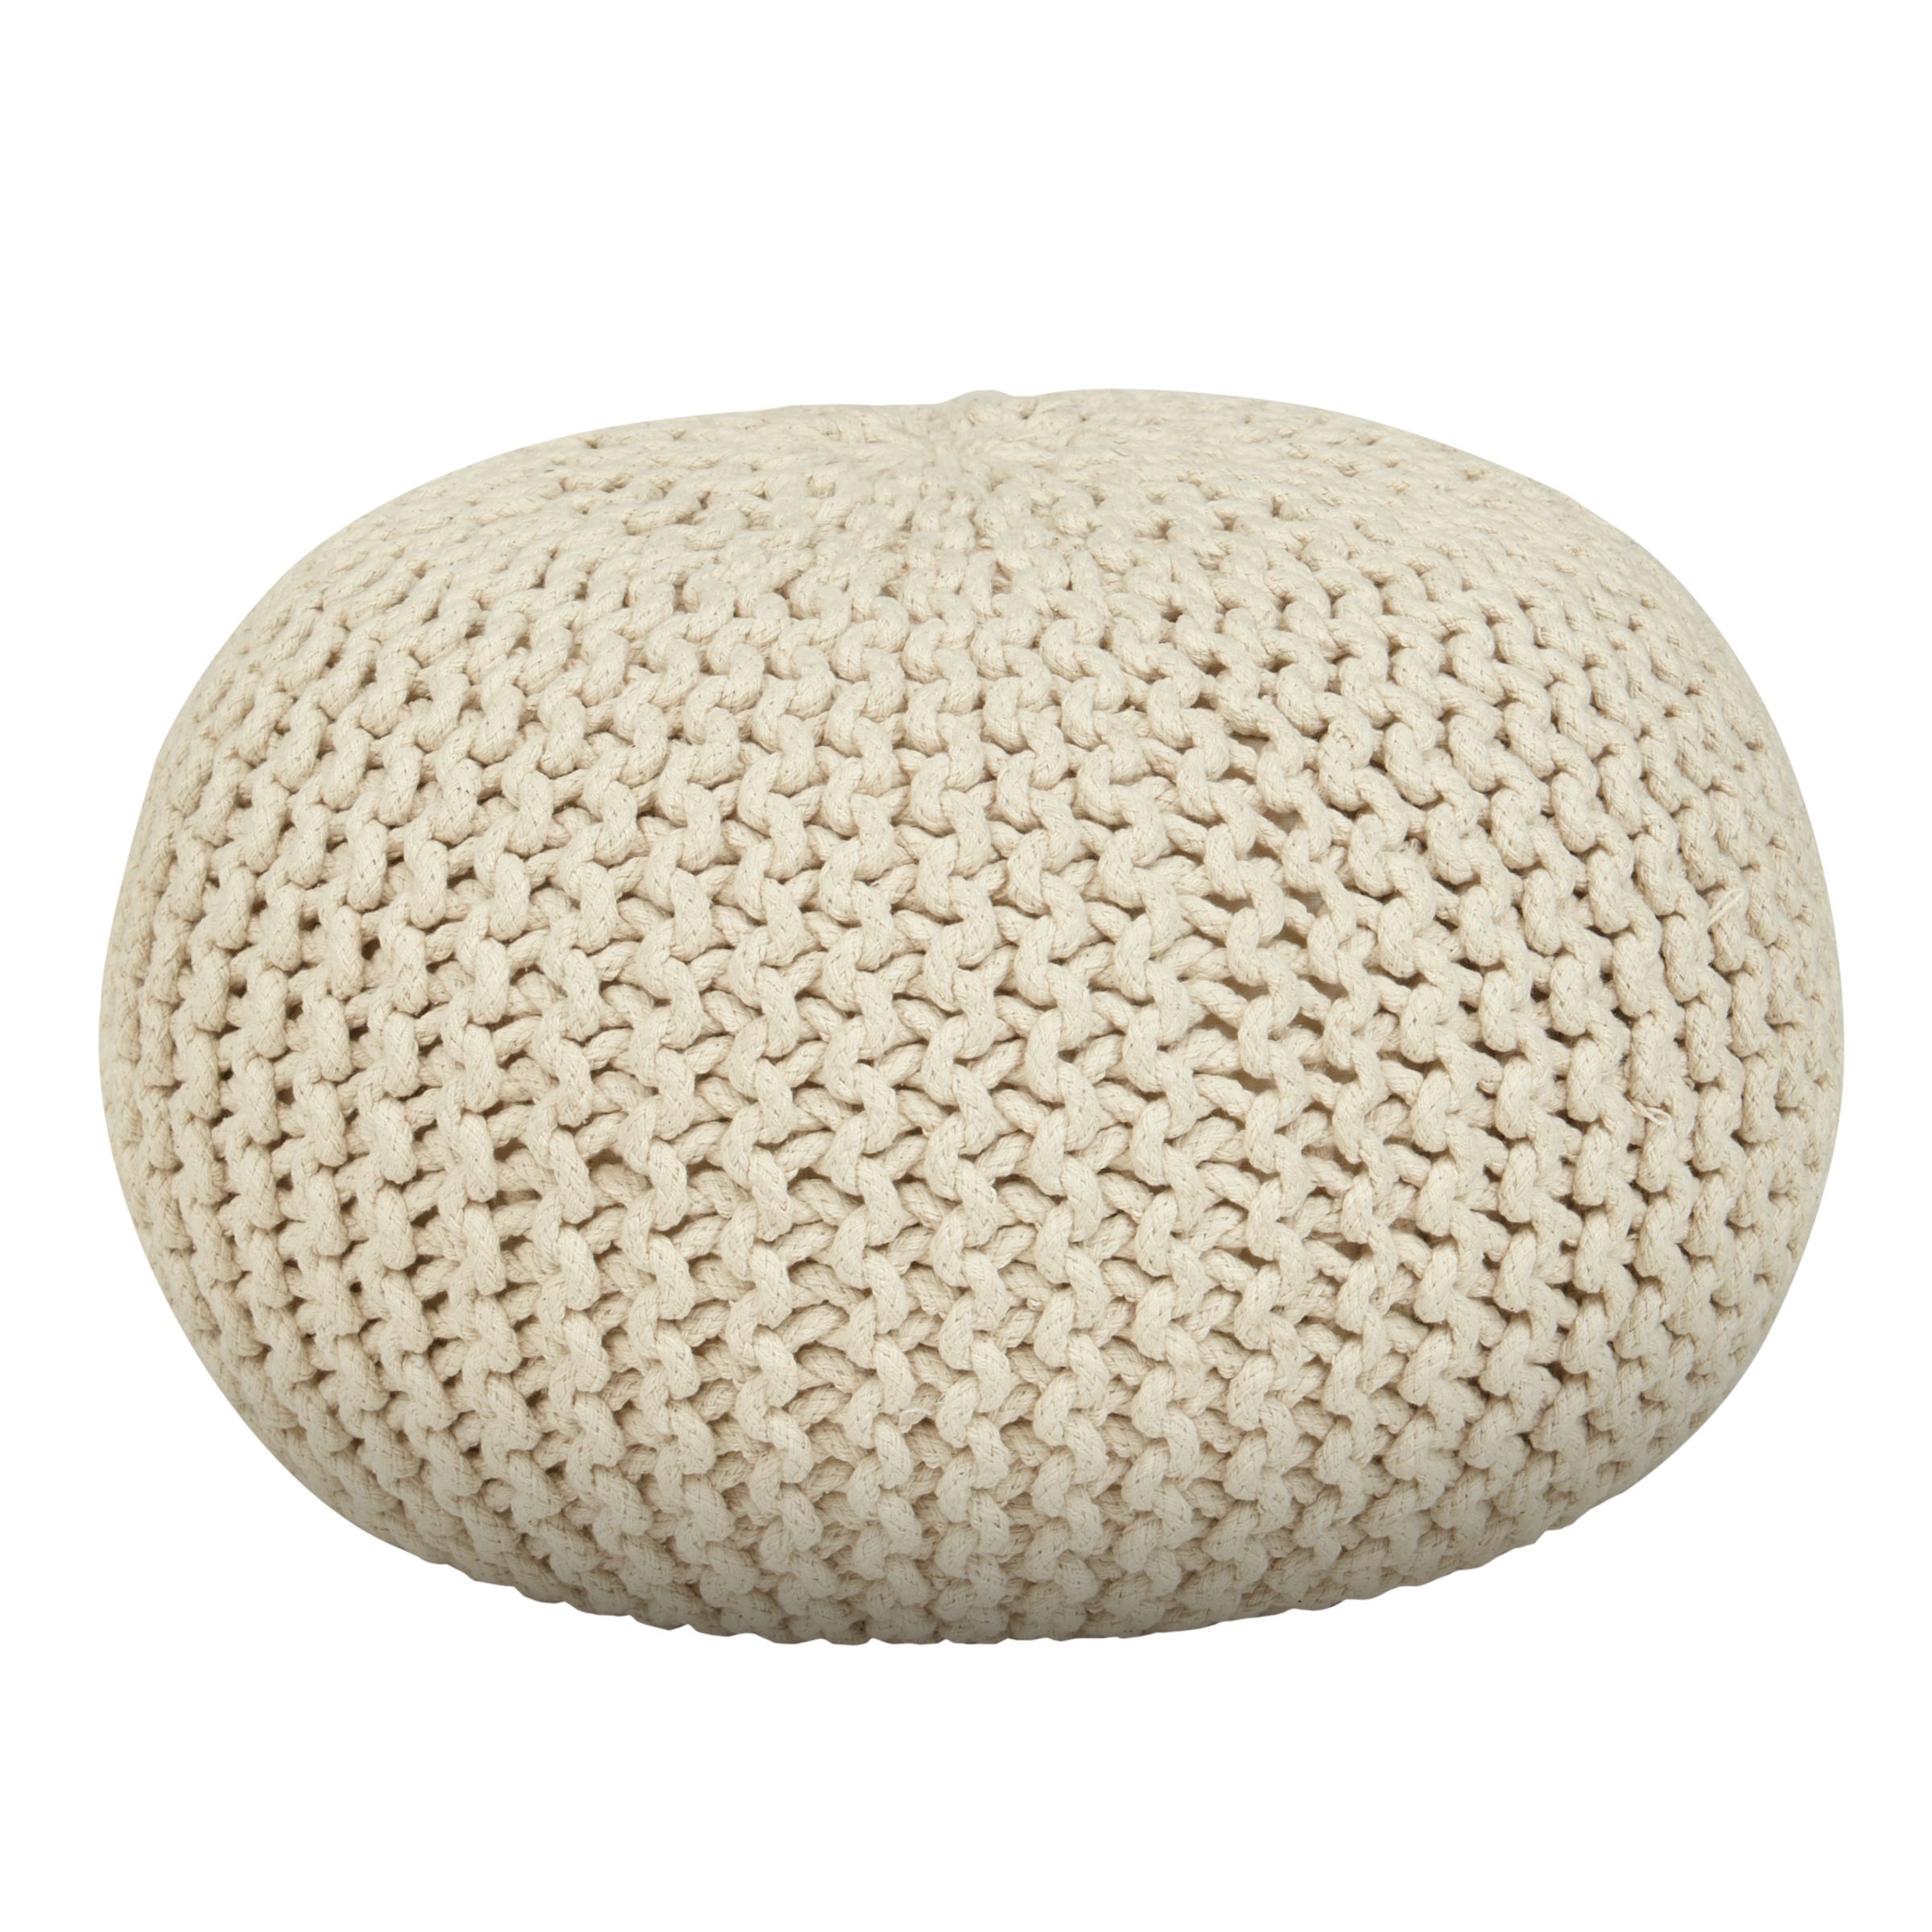 Buy Rope Pouffe Online at johnlewis.com